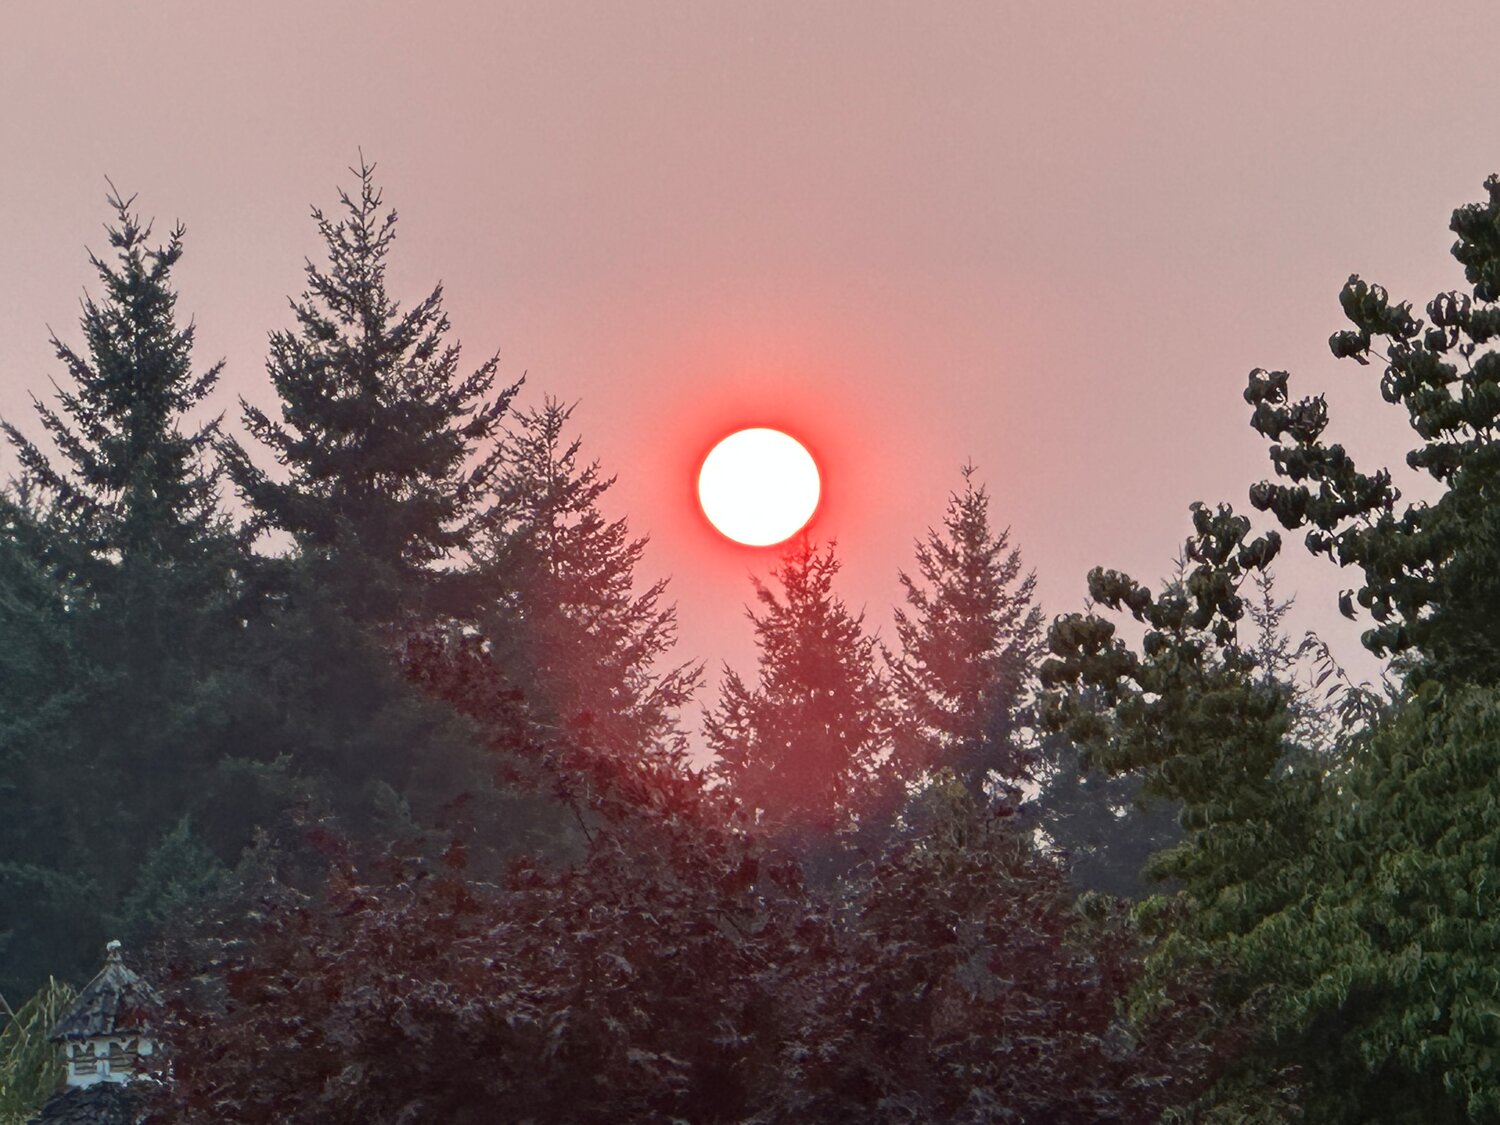 Taylor Giles submitted these photos from Napavine earlier this year as smoke from regional wildfires continued to blanket the region.